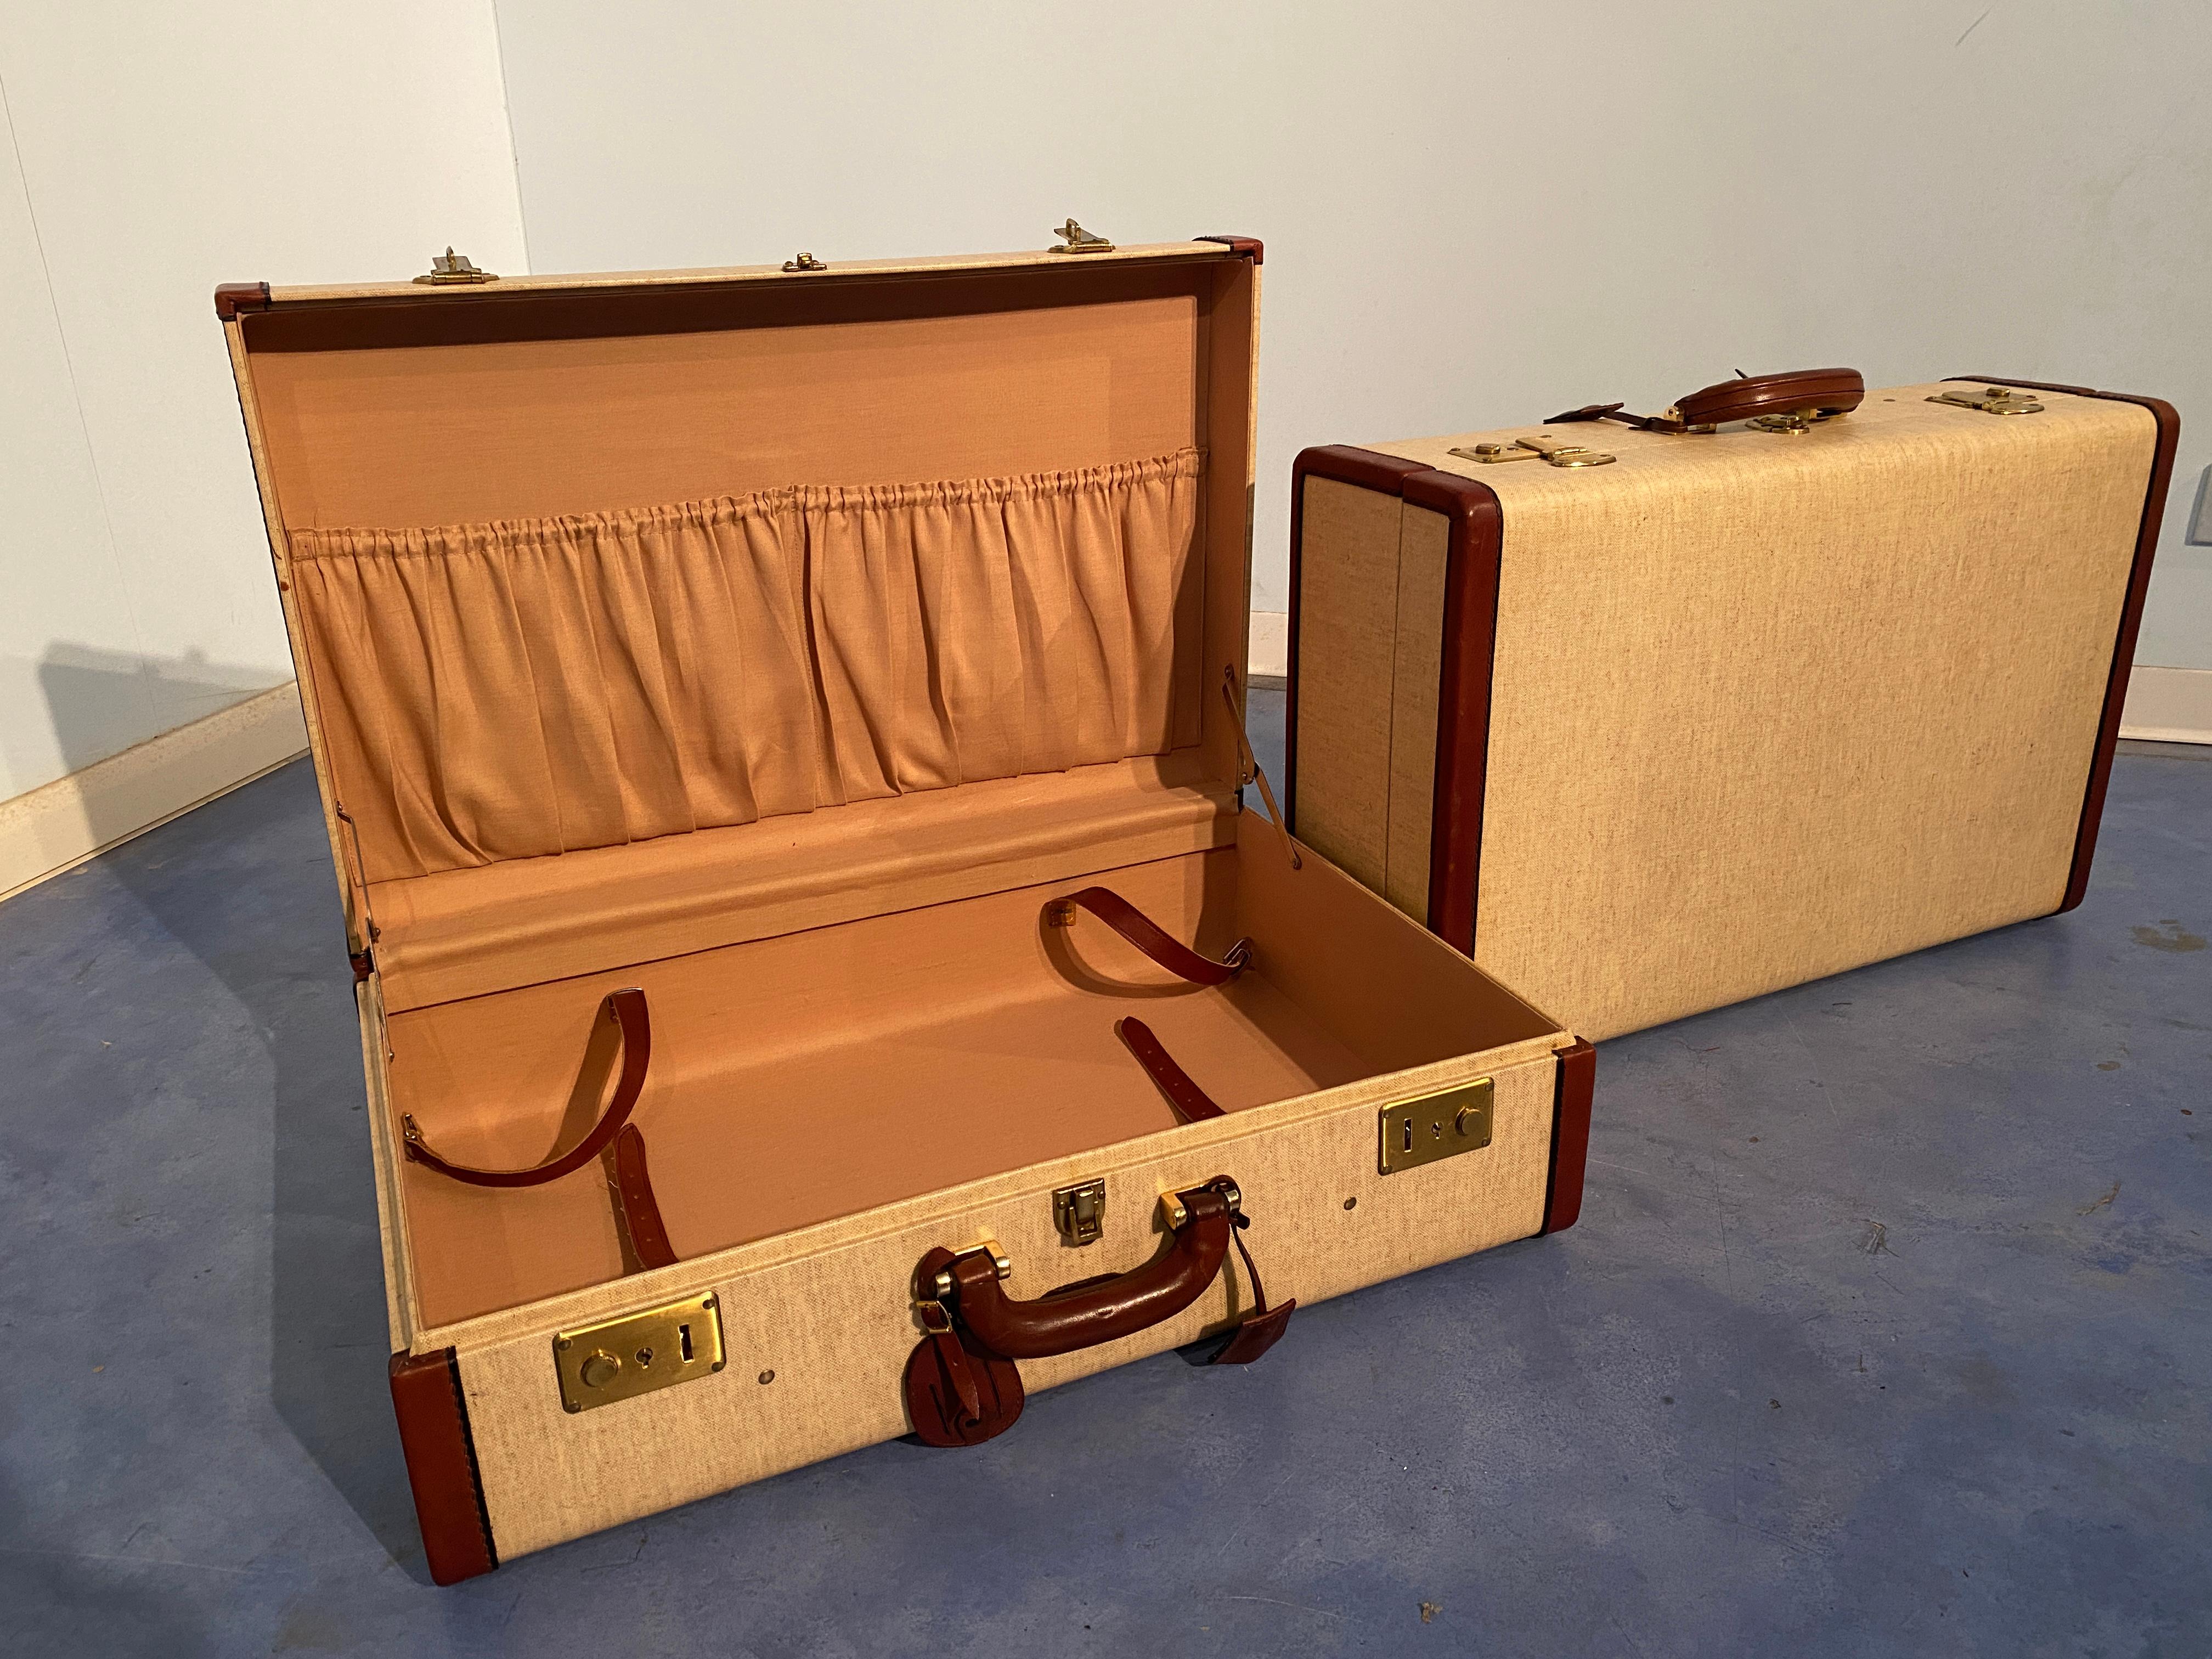 Italian Mid-Century Moder Luggages or Suitcases Mèlange Color, Set of Two, 1960 For Sale 8